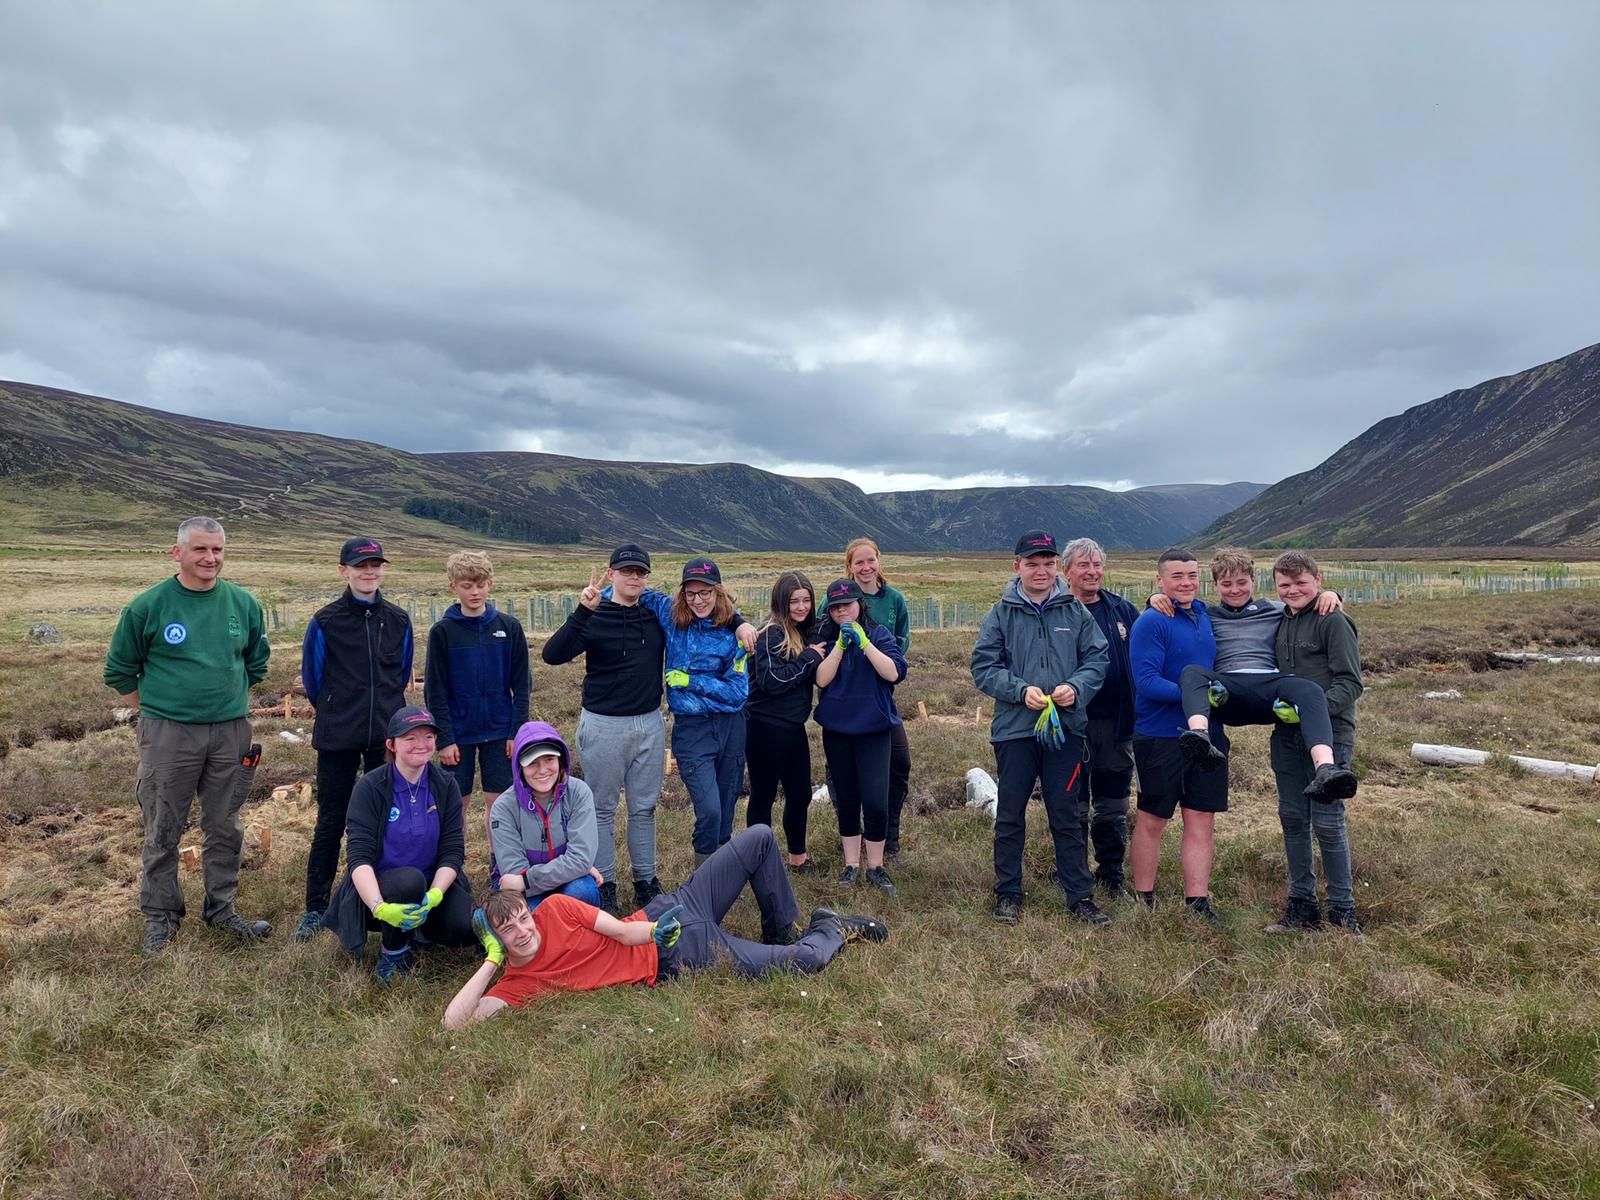 Group photo of rangers with the Cairngorms in the background